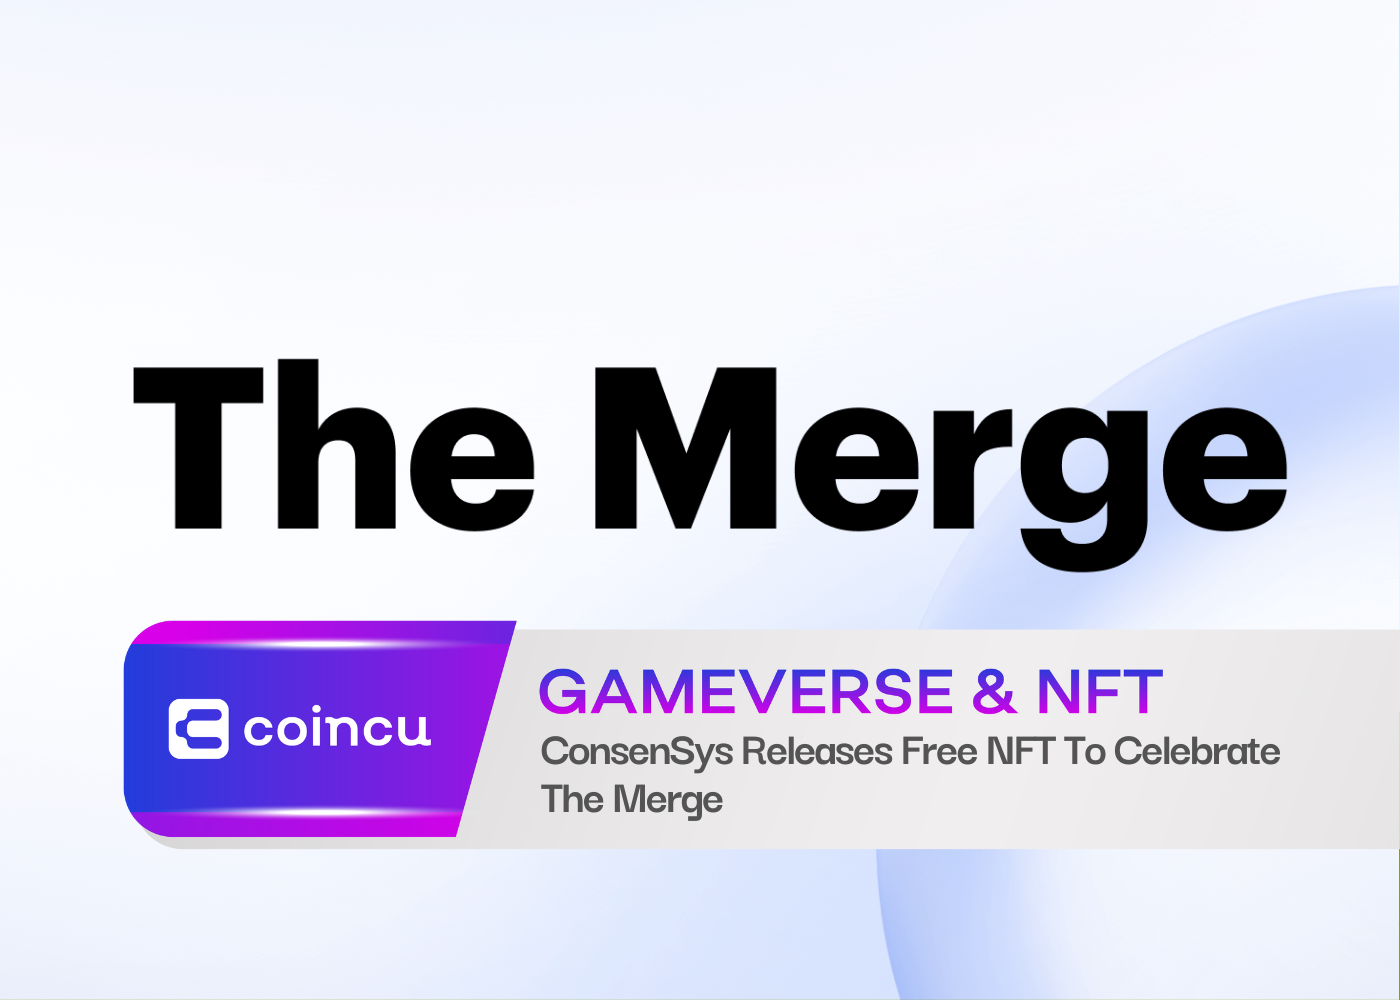 ConsenSys Releases Free NFT To Celebrate The Merge